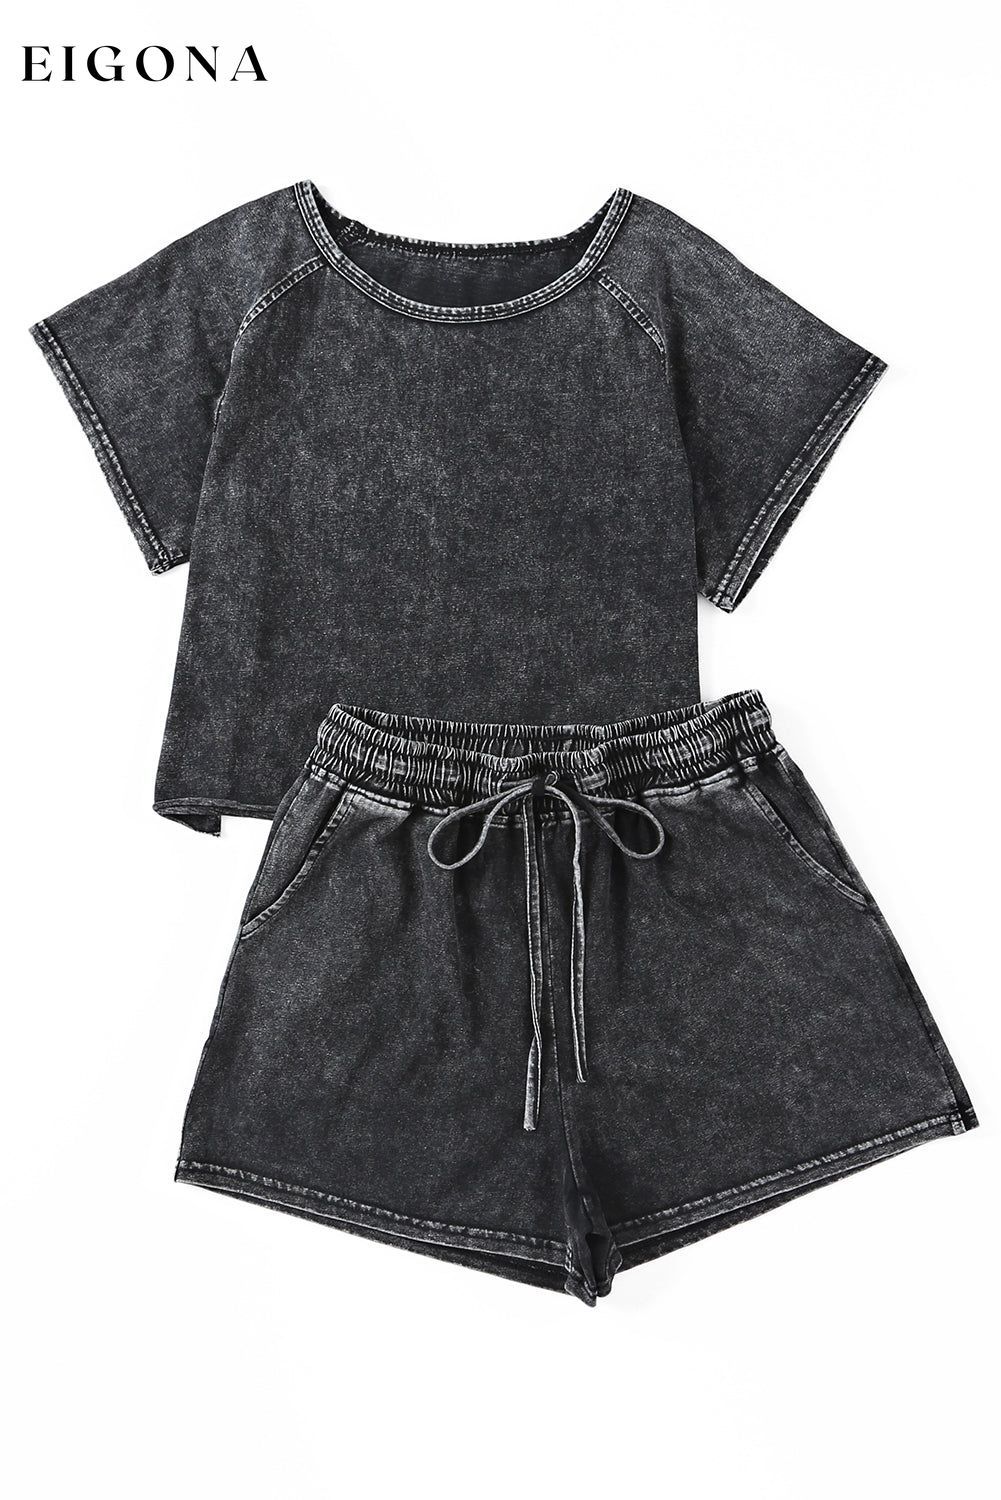 Black Acid Washed Short Lounge Set 2 pieces clothes Craft Washed Occasion Home Print Solid Color Season Summer set short set Style Casual